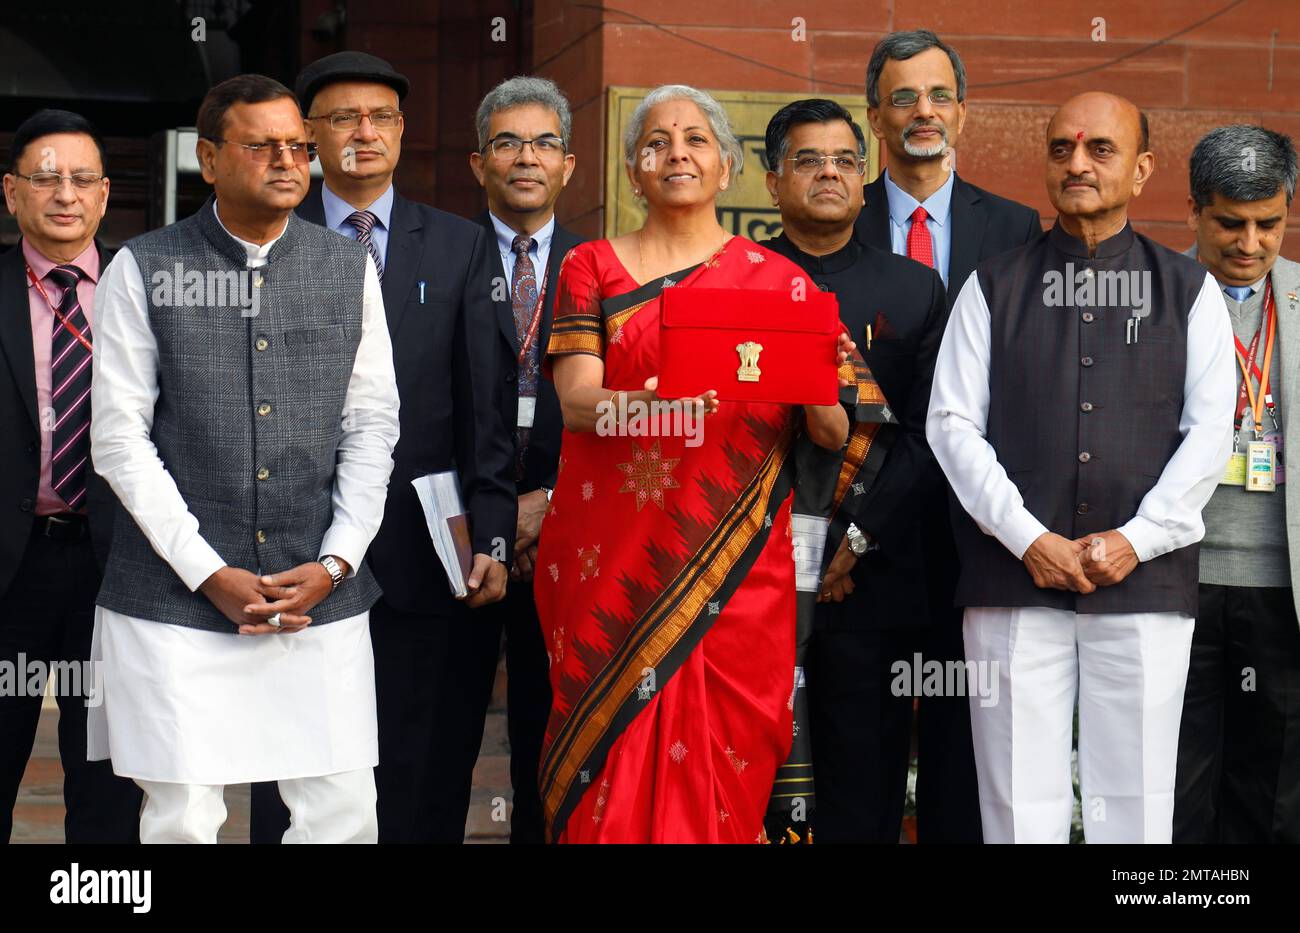 New Delhi, India. 01st Feb, 2023. Union Minister for Finance, Nirmala Sitharaman, Centre, Union Minister of Sate Bhagwat Kishanrao Karad, Right, and Pankaj Chaudhary, Left with other officials pose for photographs before she leaves her office (Finance Ministry), for the President's House before present the annual Budget for the year 2023-24 in the Parliament in New Delhi. Nirmala Sitharaman will be presenting her fifth union Budget. (Photo by Naveen Sharma/SOPA Images/Sipa USA) Credit: Sipa USA/Alamy Live News Stock Photo